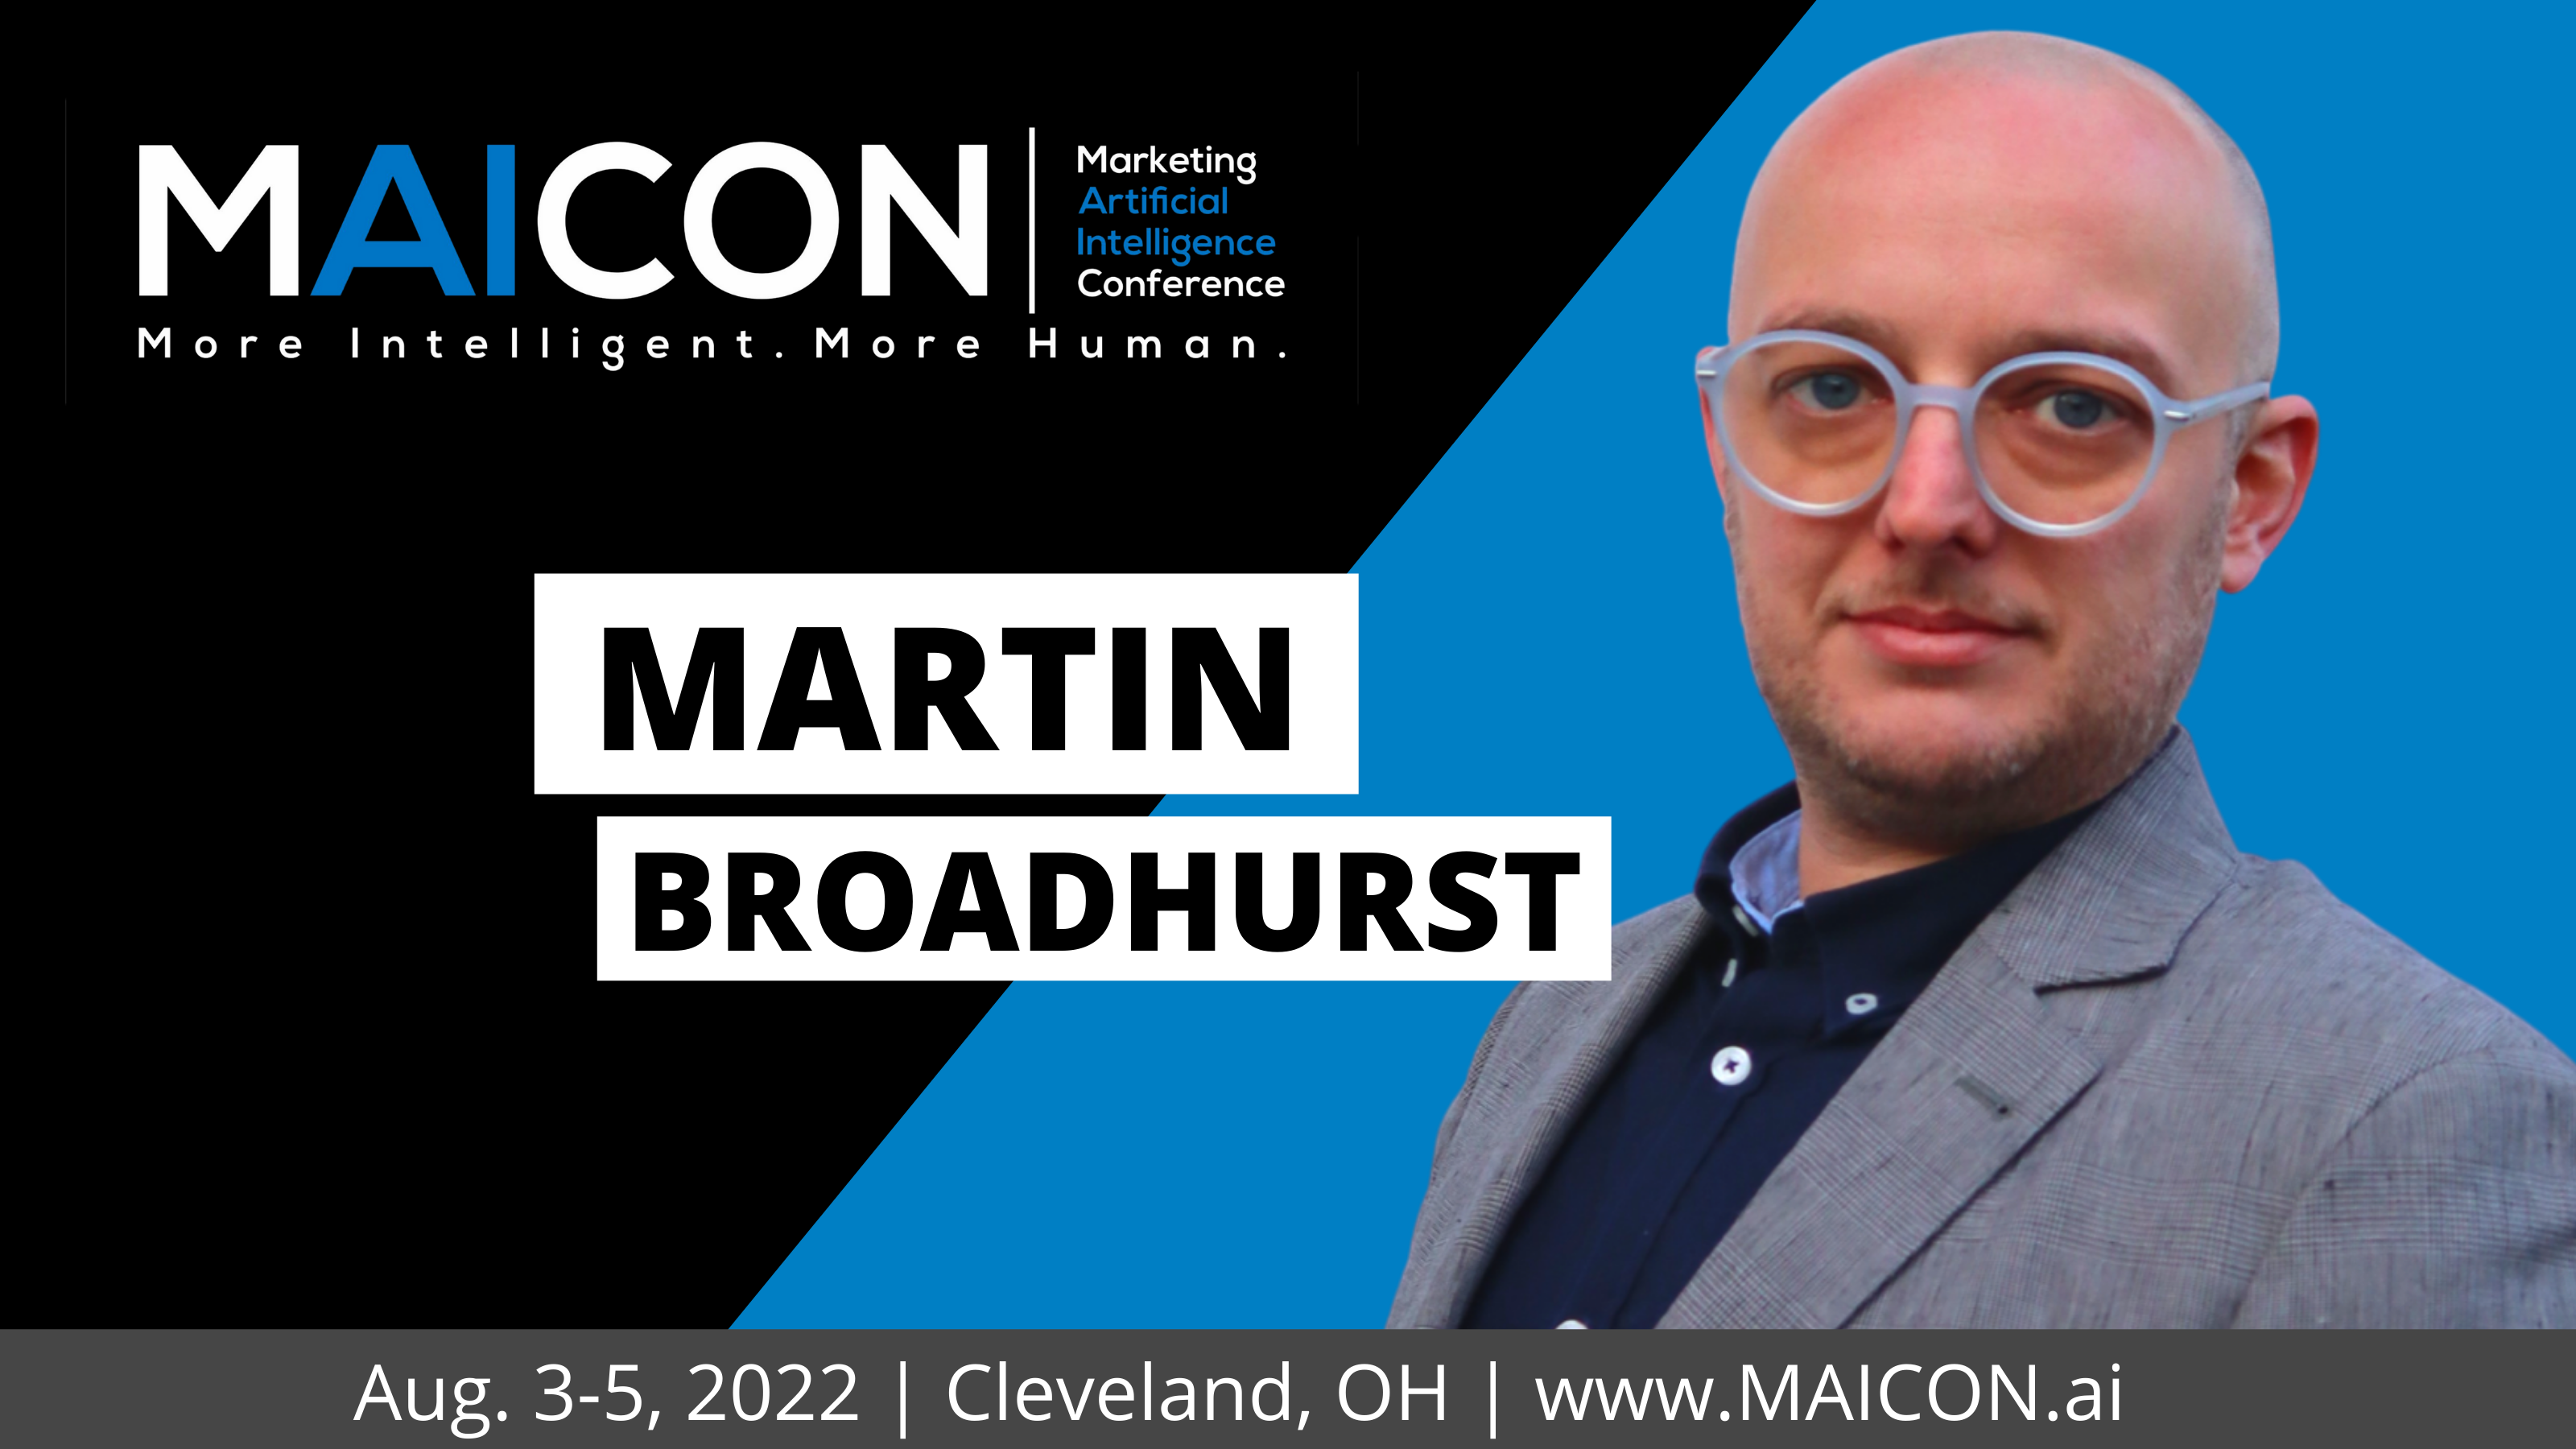 Broadhurst Digital MD to speak at world’s largest marketing and artificial intelligence conference